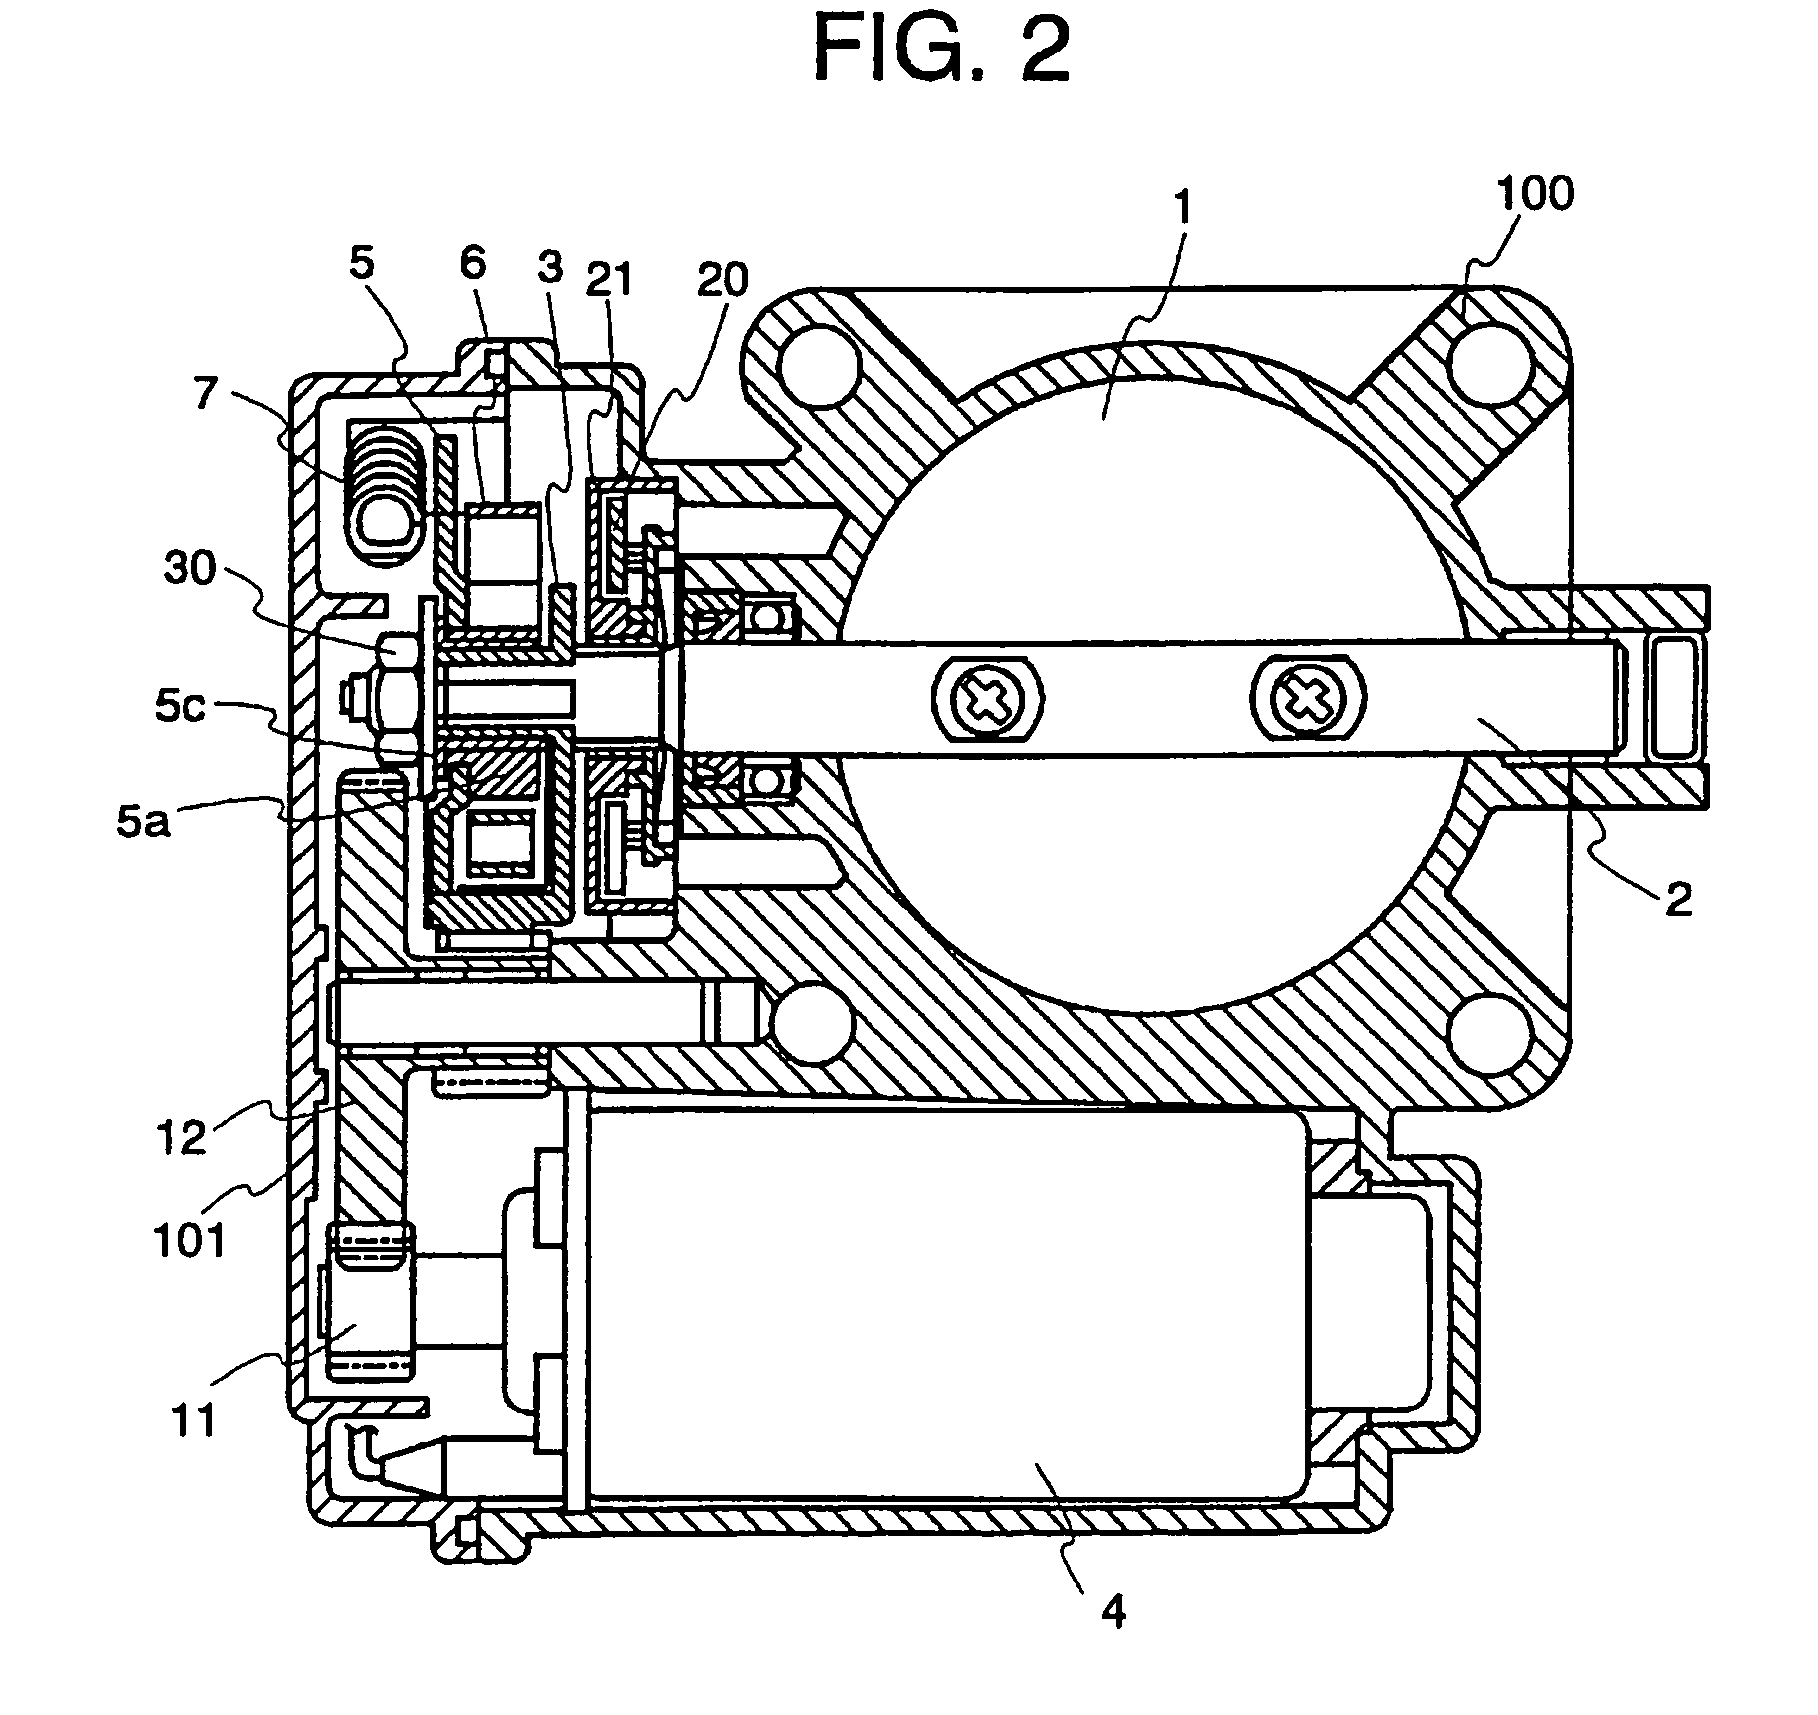 Throttle valve control device for an internal combustion engine